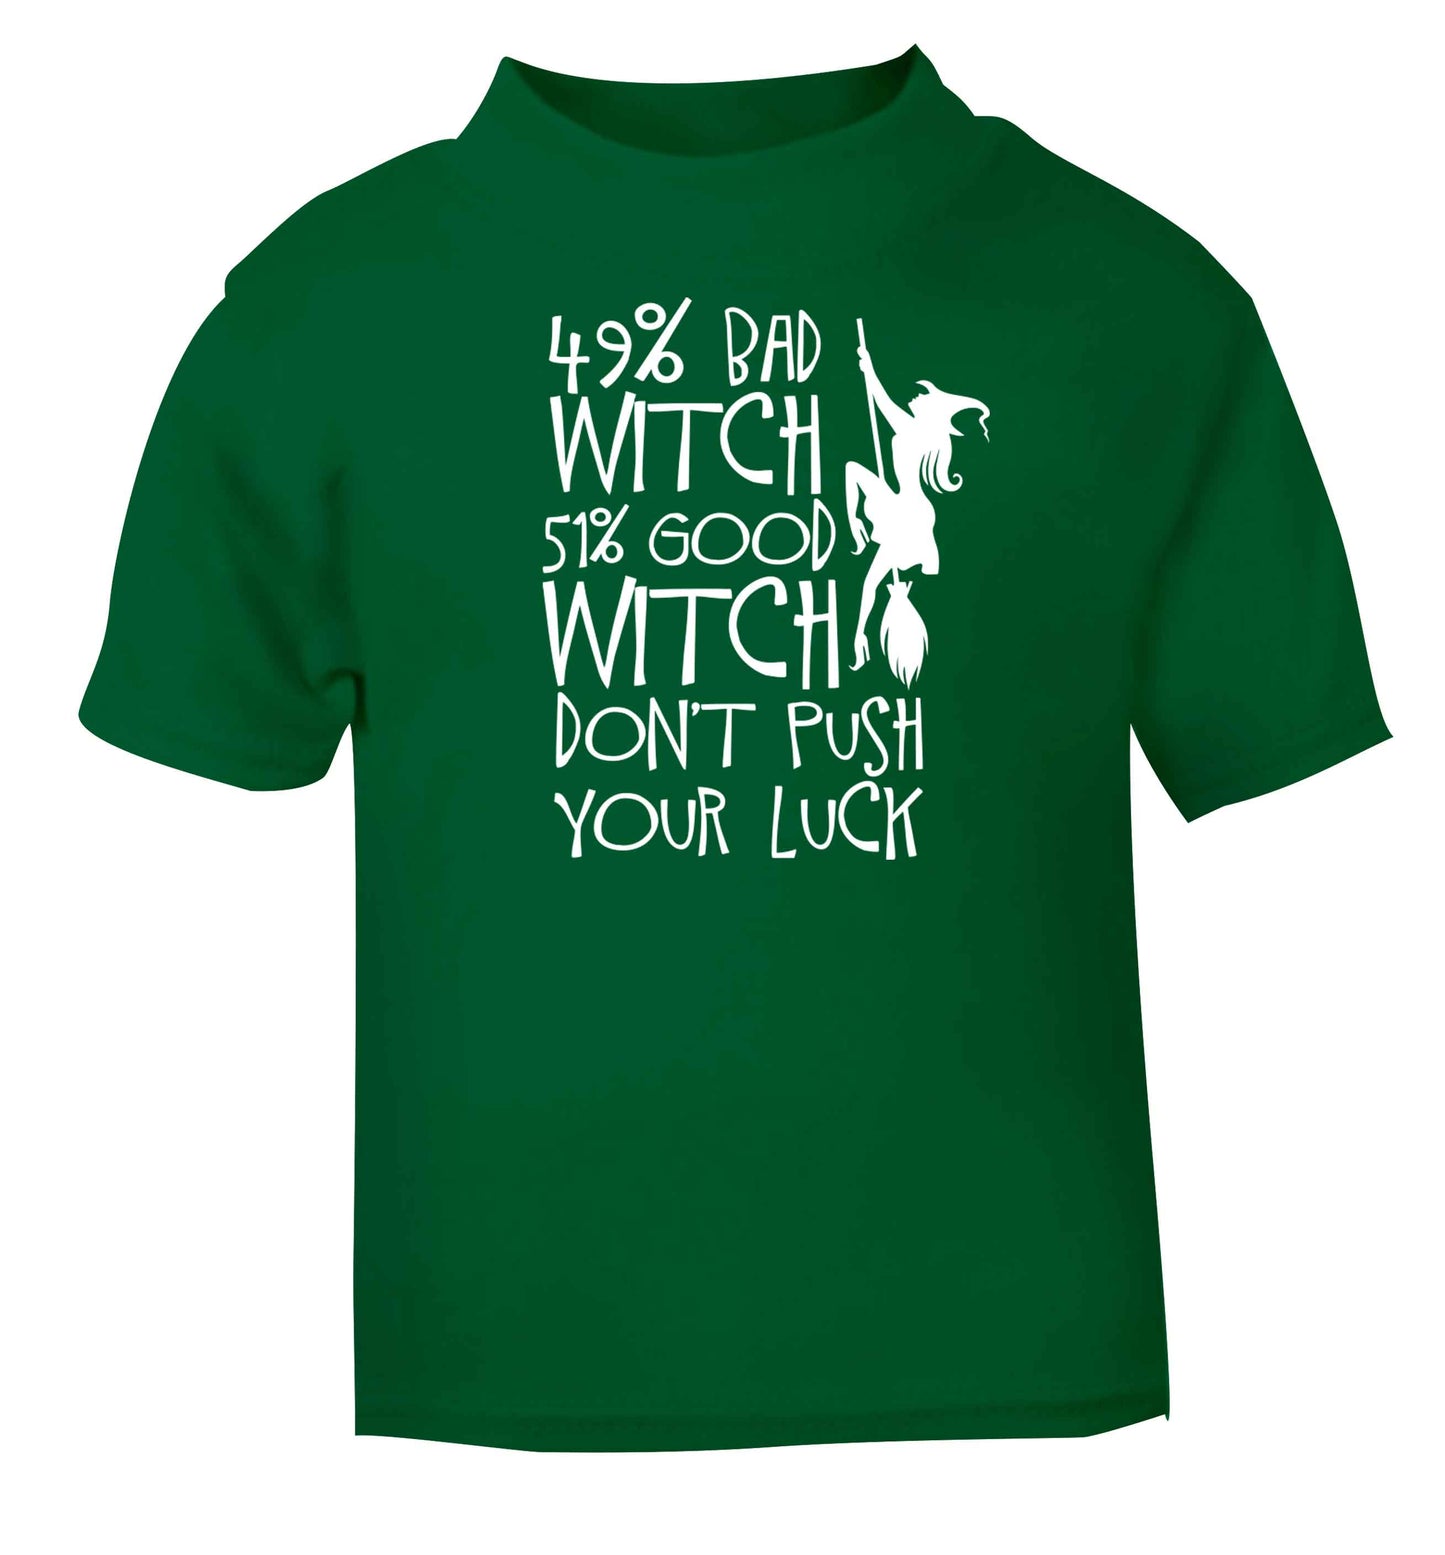 49% bad witch 51% good witch don't push your luck green baby toddler Tshirt 2 Years